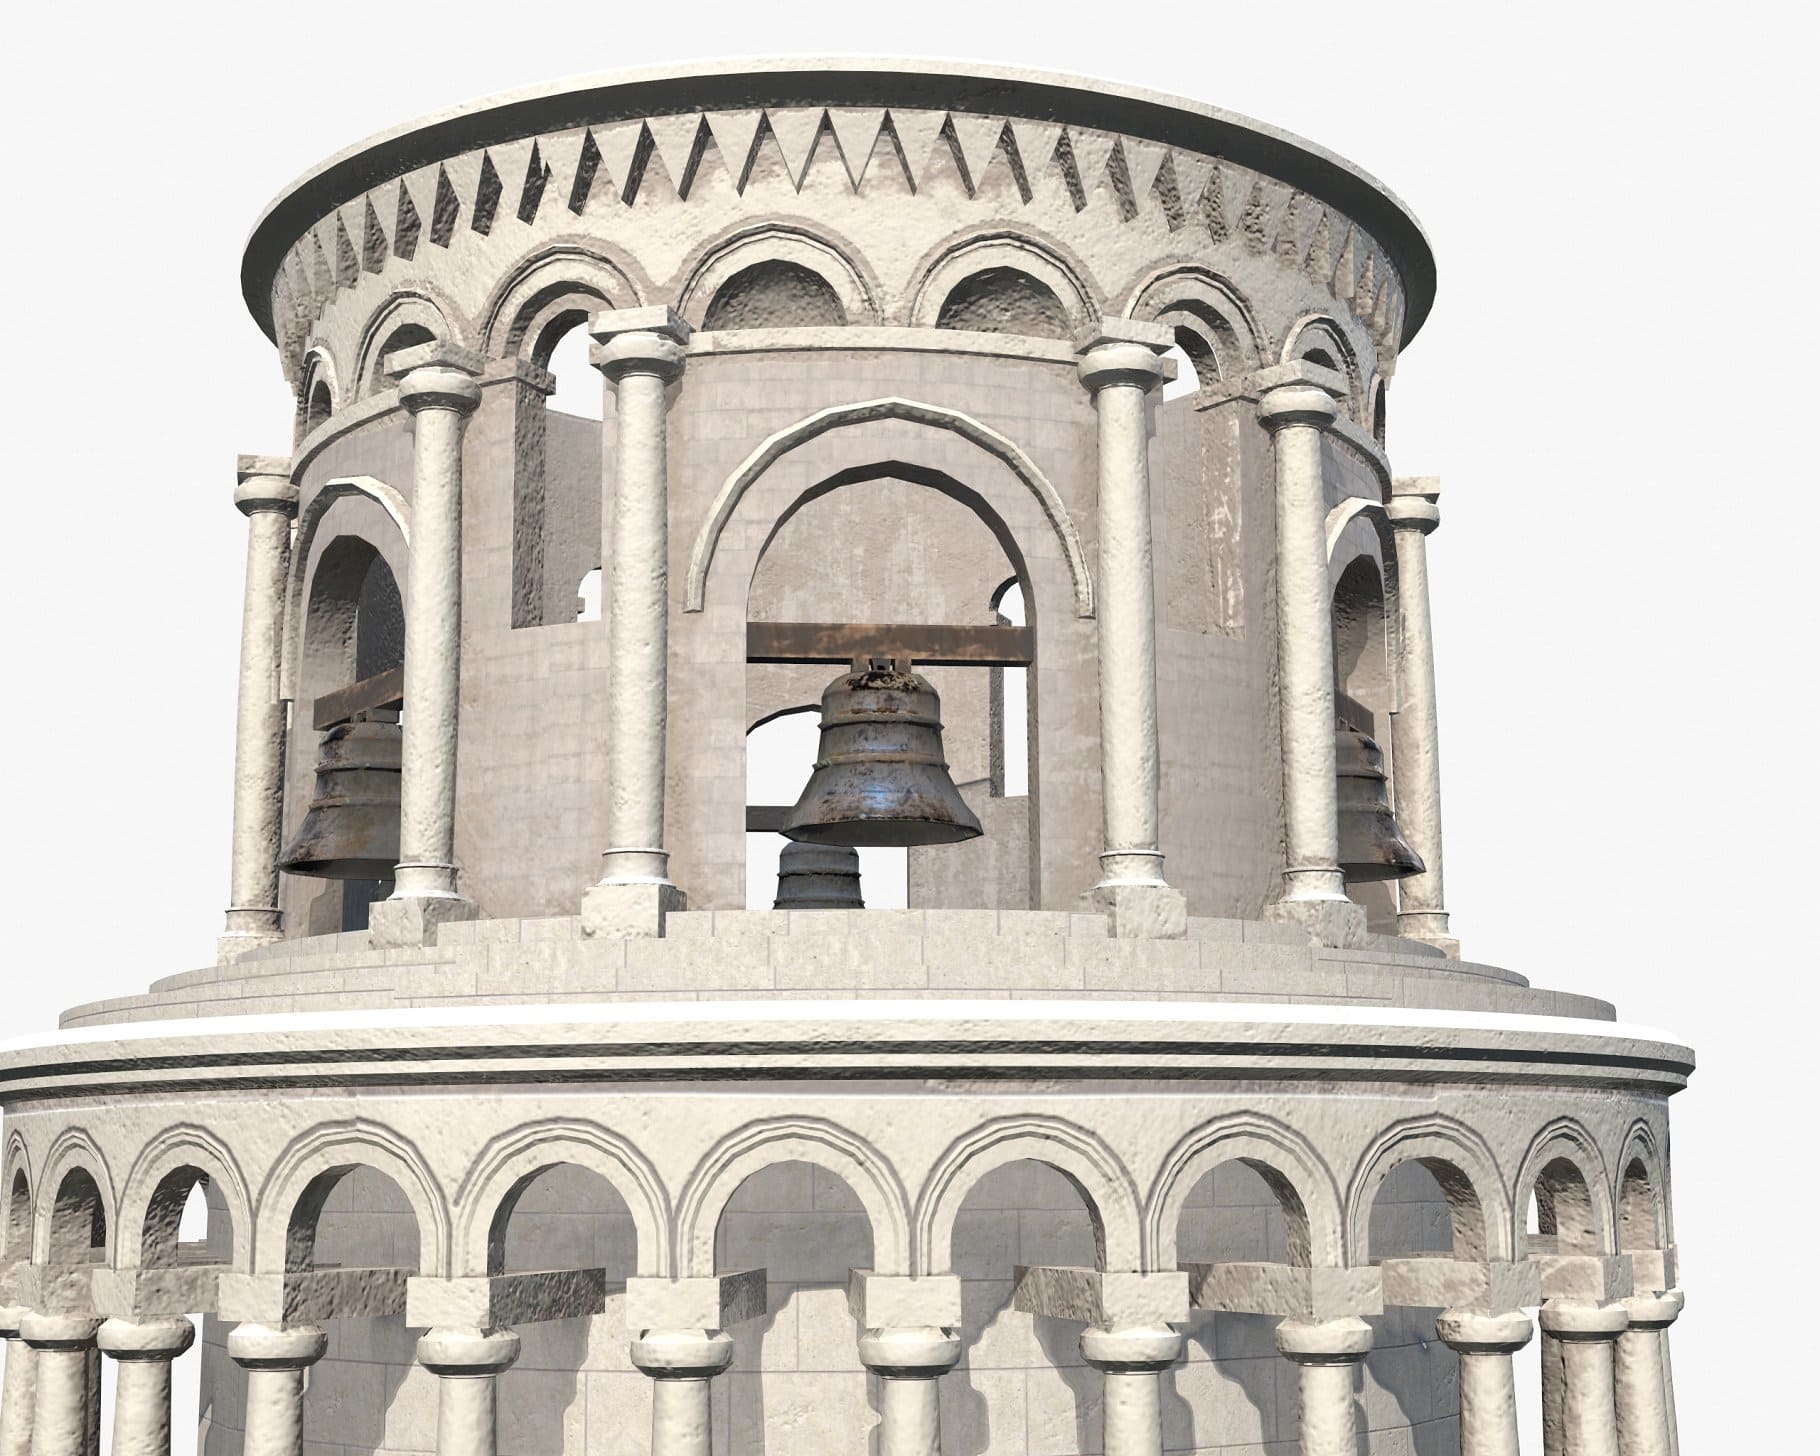 Metal bells are depicted on a 3D model of the Leaning Tower of Pisa.